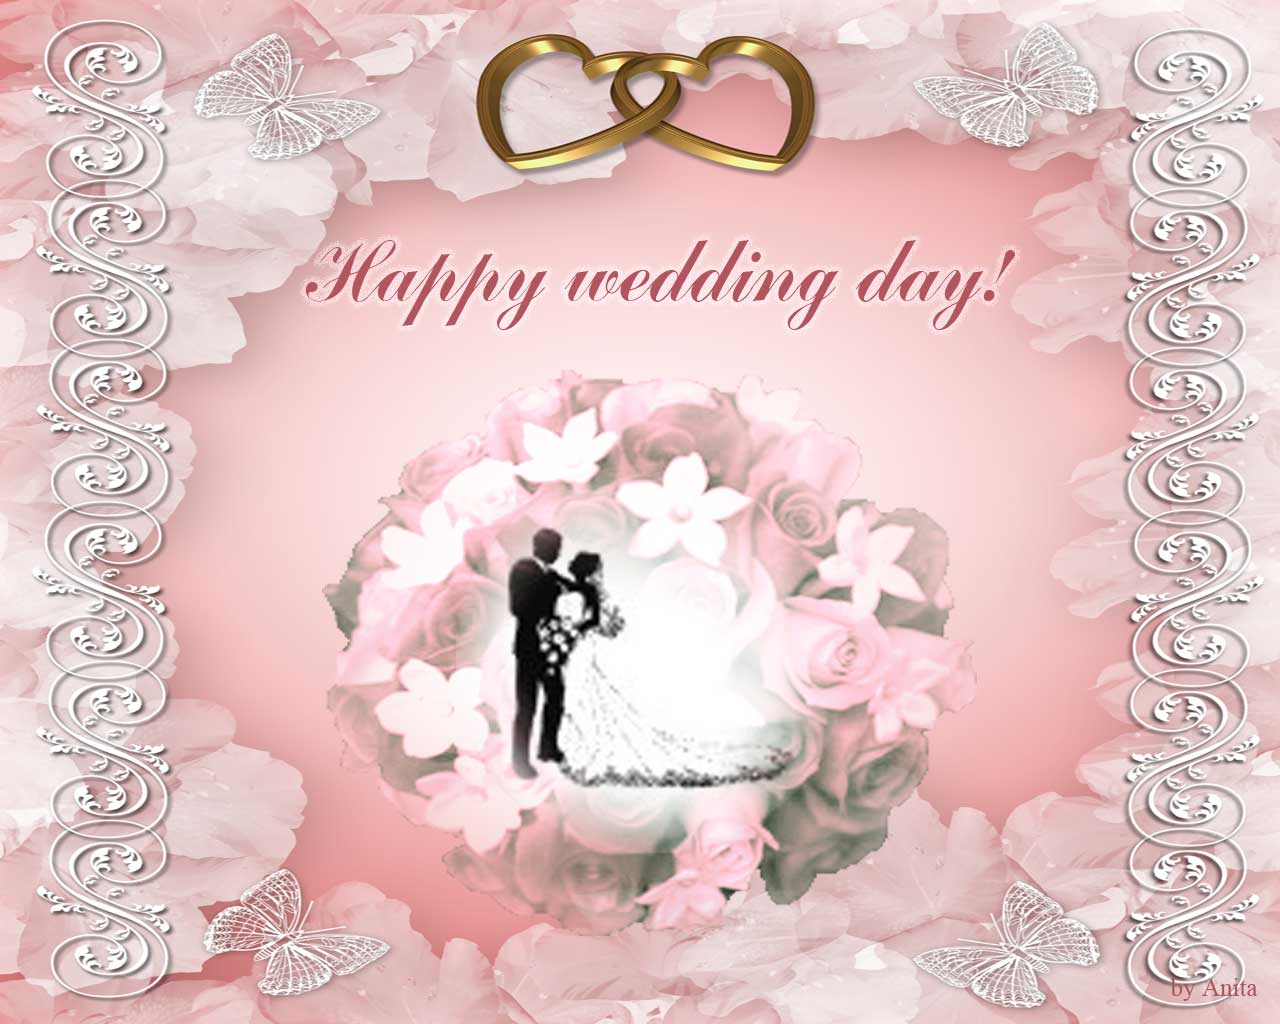 Free download happy wedding day wishes Car Tuning [1280x1024] for your Desktop, Mobile & Tablet. Explore Wedding Day Wallpaper. Elegant Wedding Wallpaper, Wedding Background Wallpaper Free